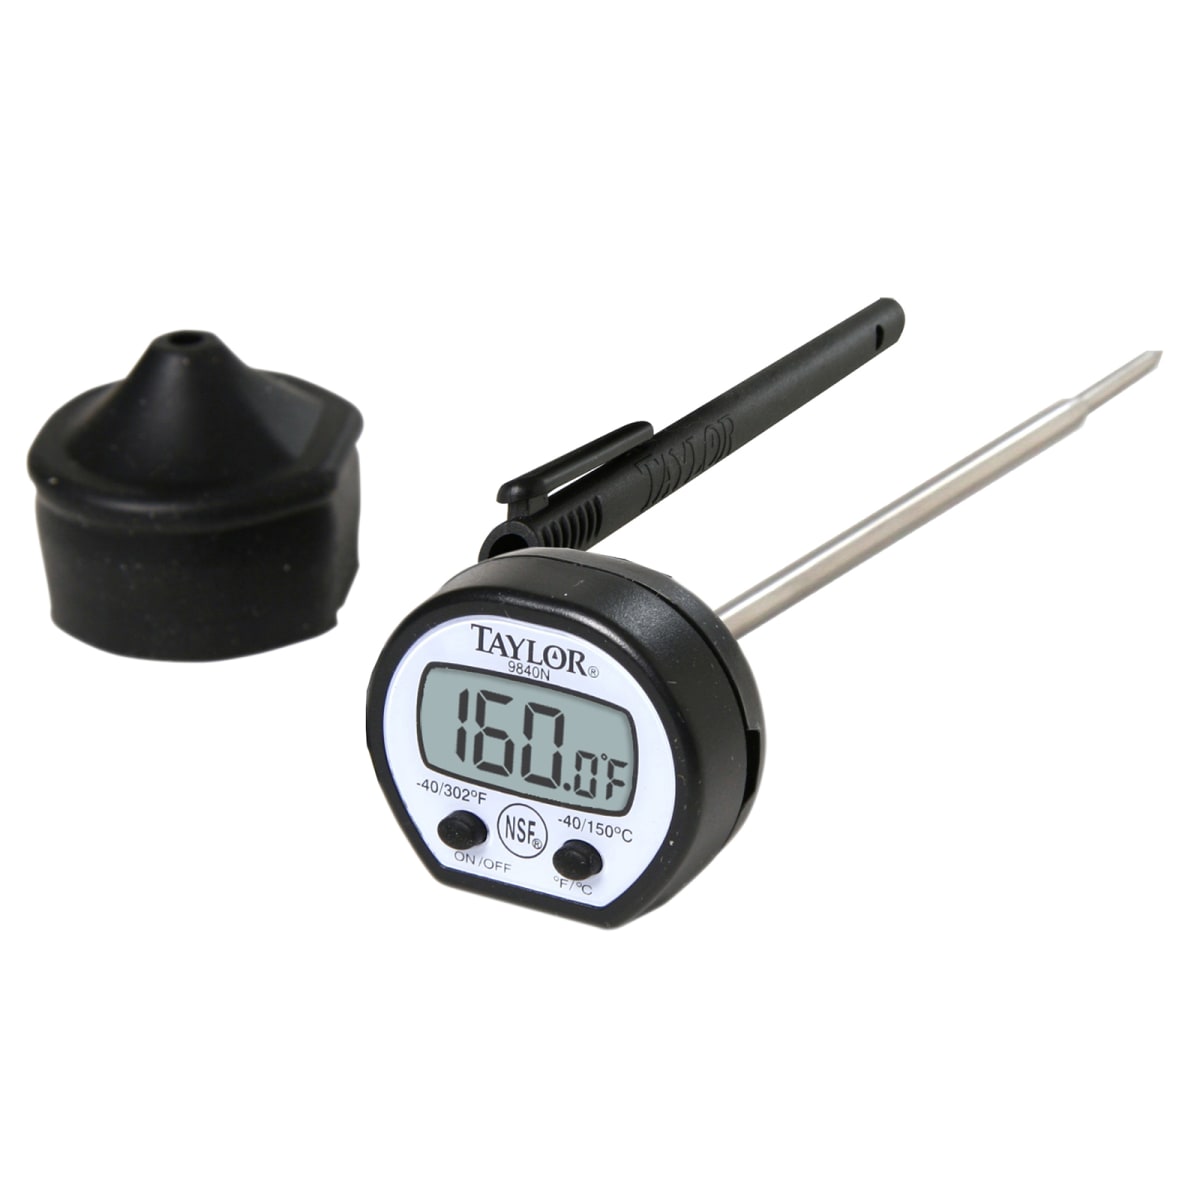 Taylor Adjustable Probe Thermometer